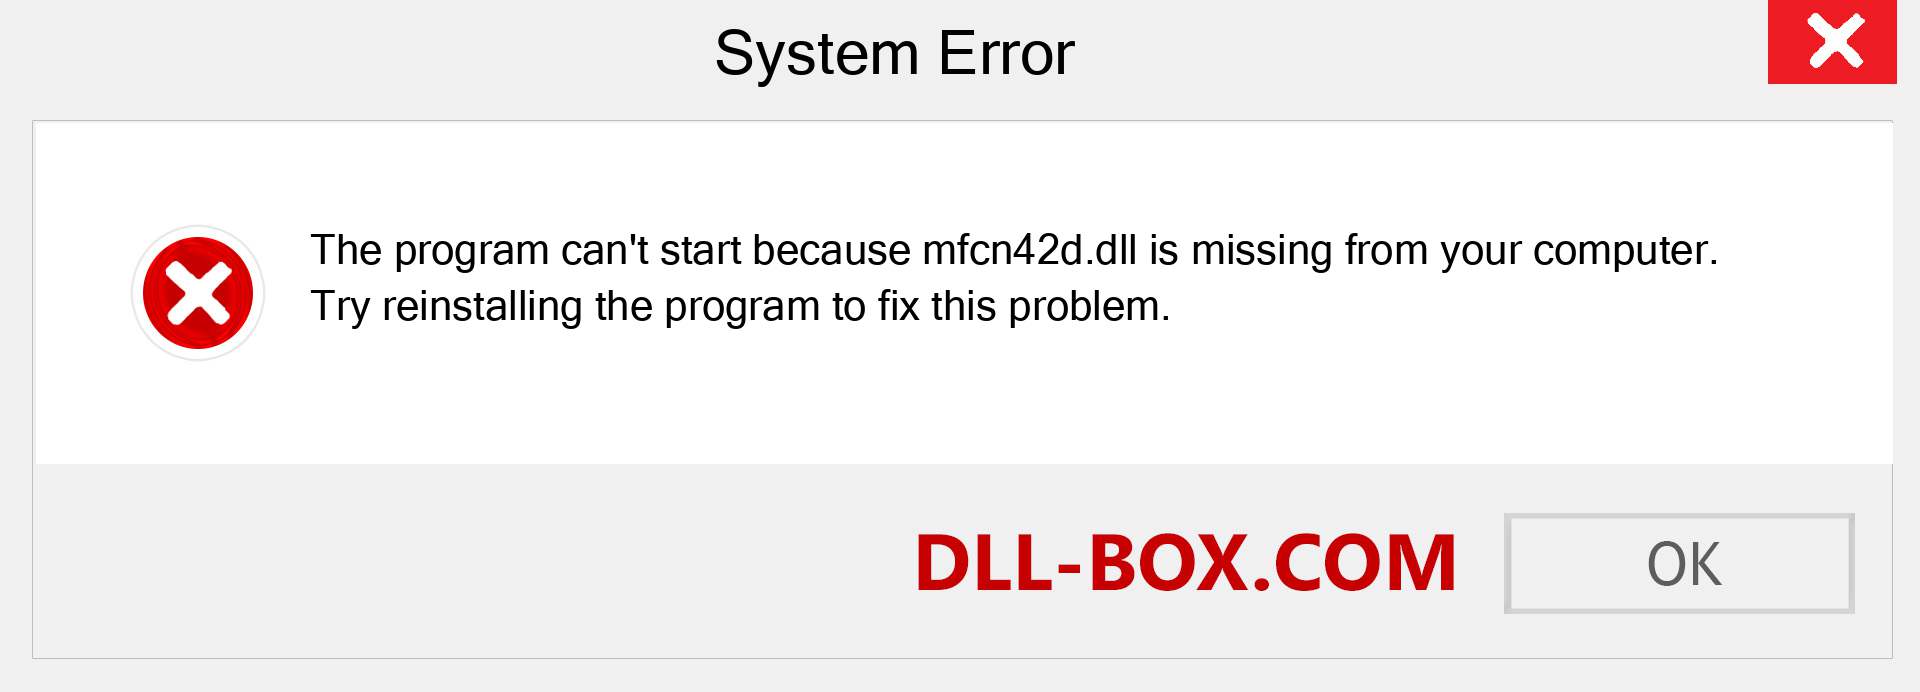  mfcn42d.dll file is missing?. Download for Windows 7, 8, 10 - Fix  mfcn42d dll Missing Error on Windows, photos, images